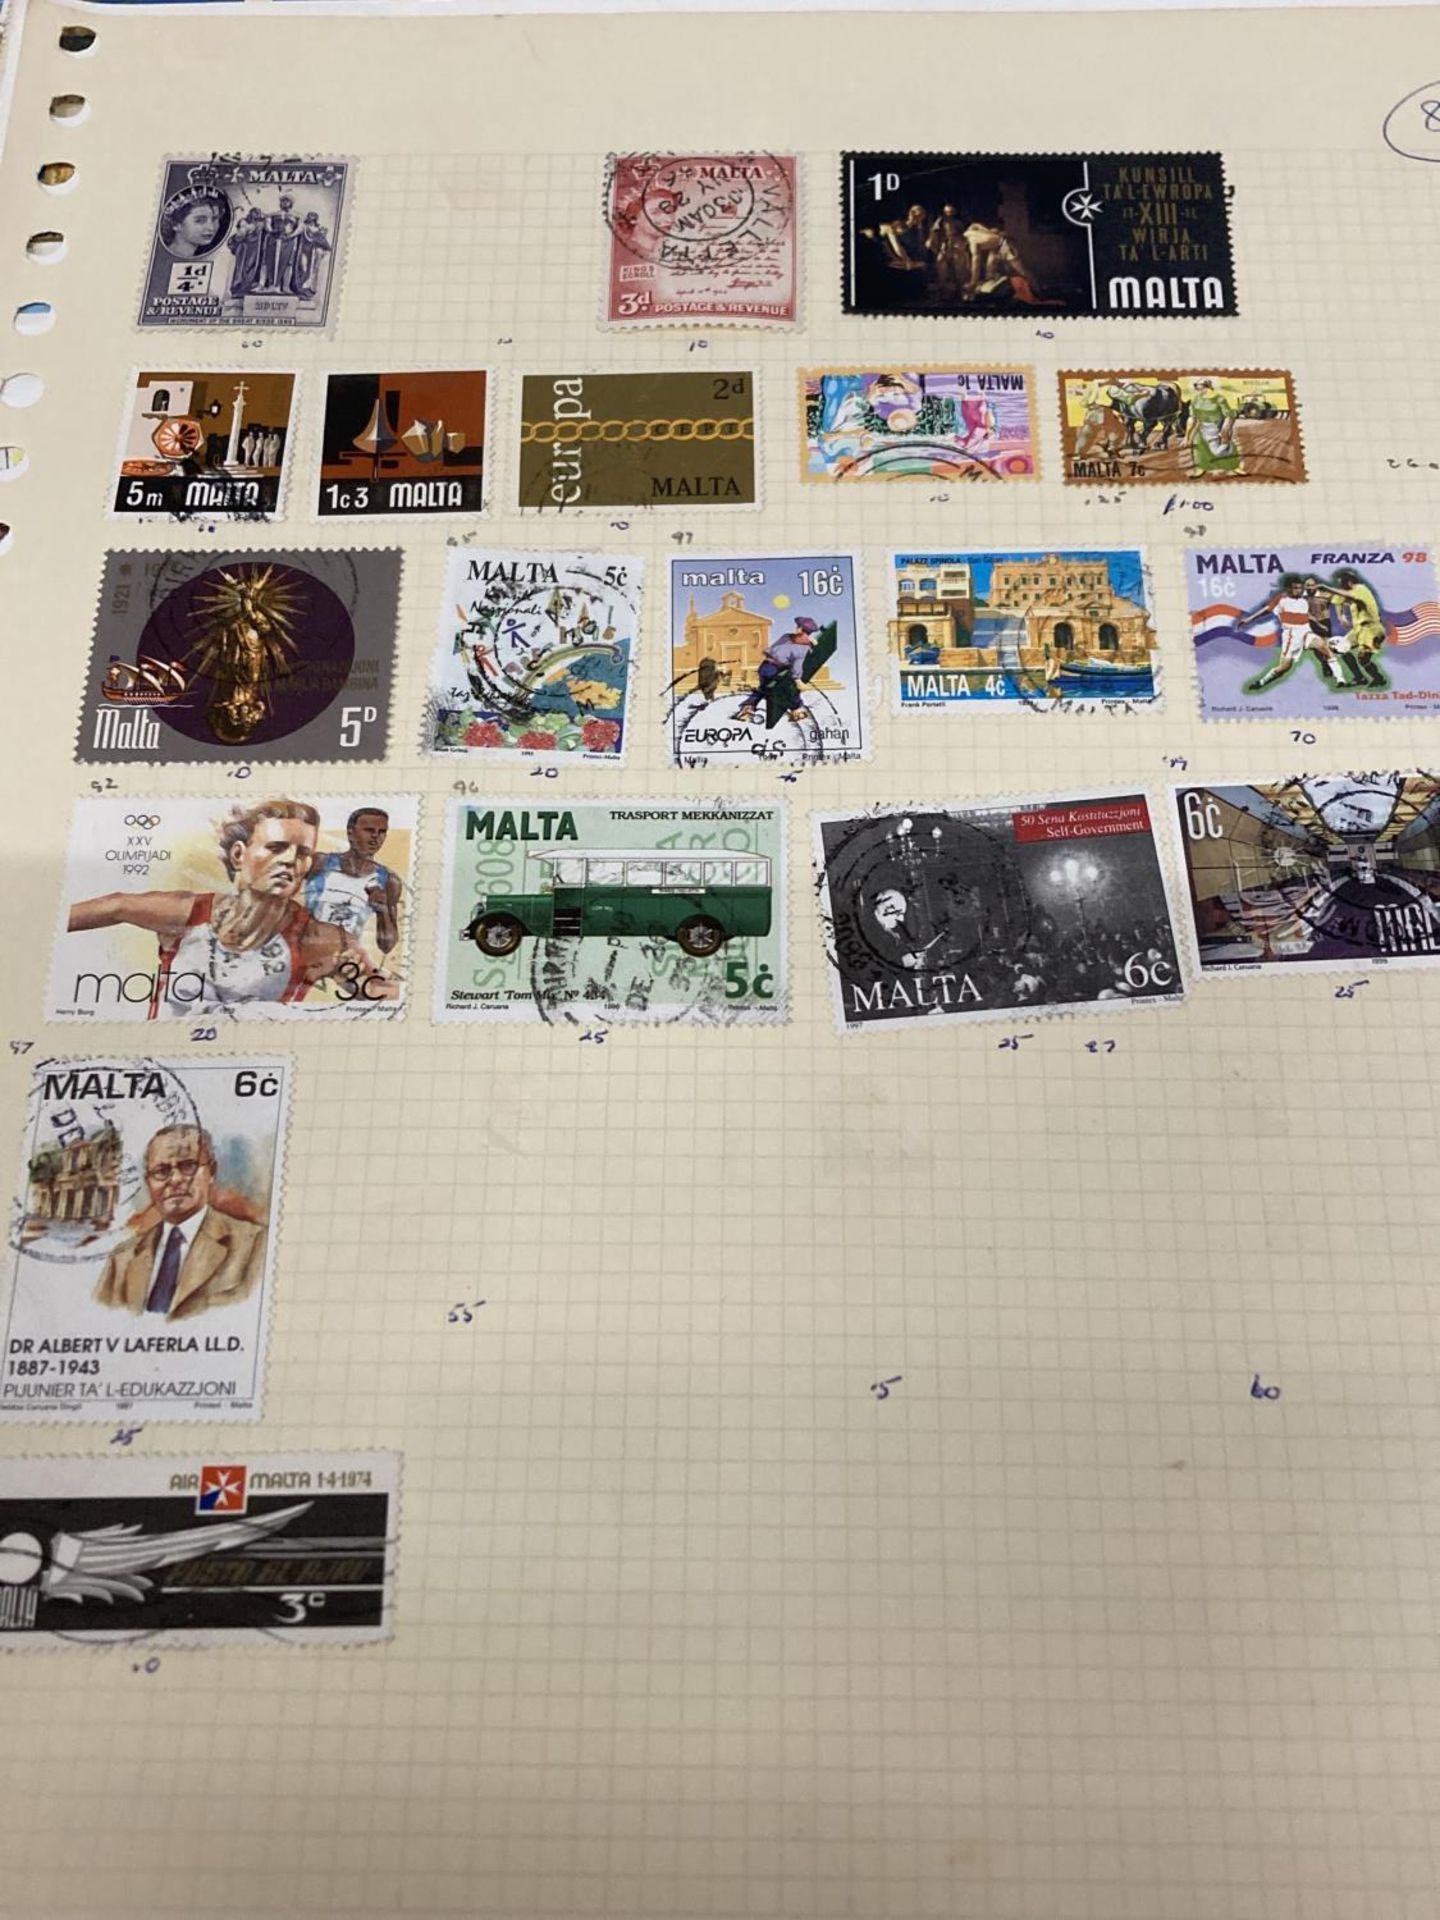 TEN PLUS SHEETS CONTAINING STAMPS FROM MALTA - Image 3 of 6